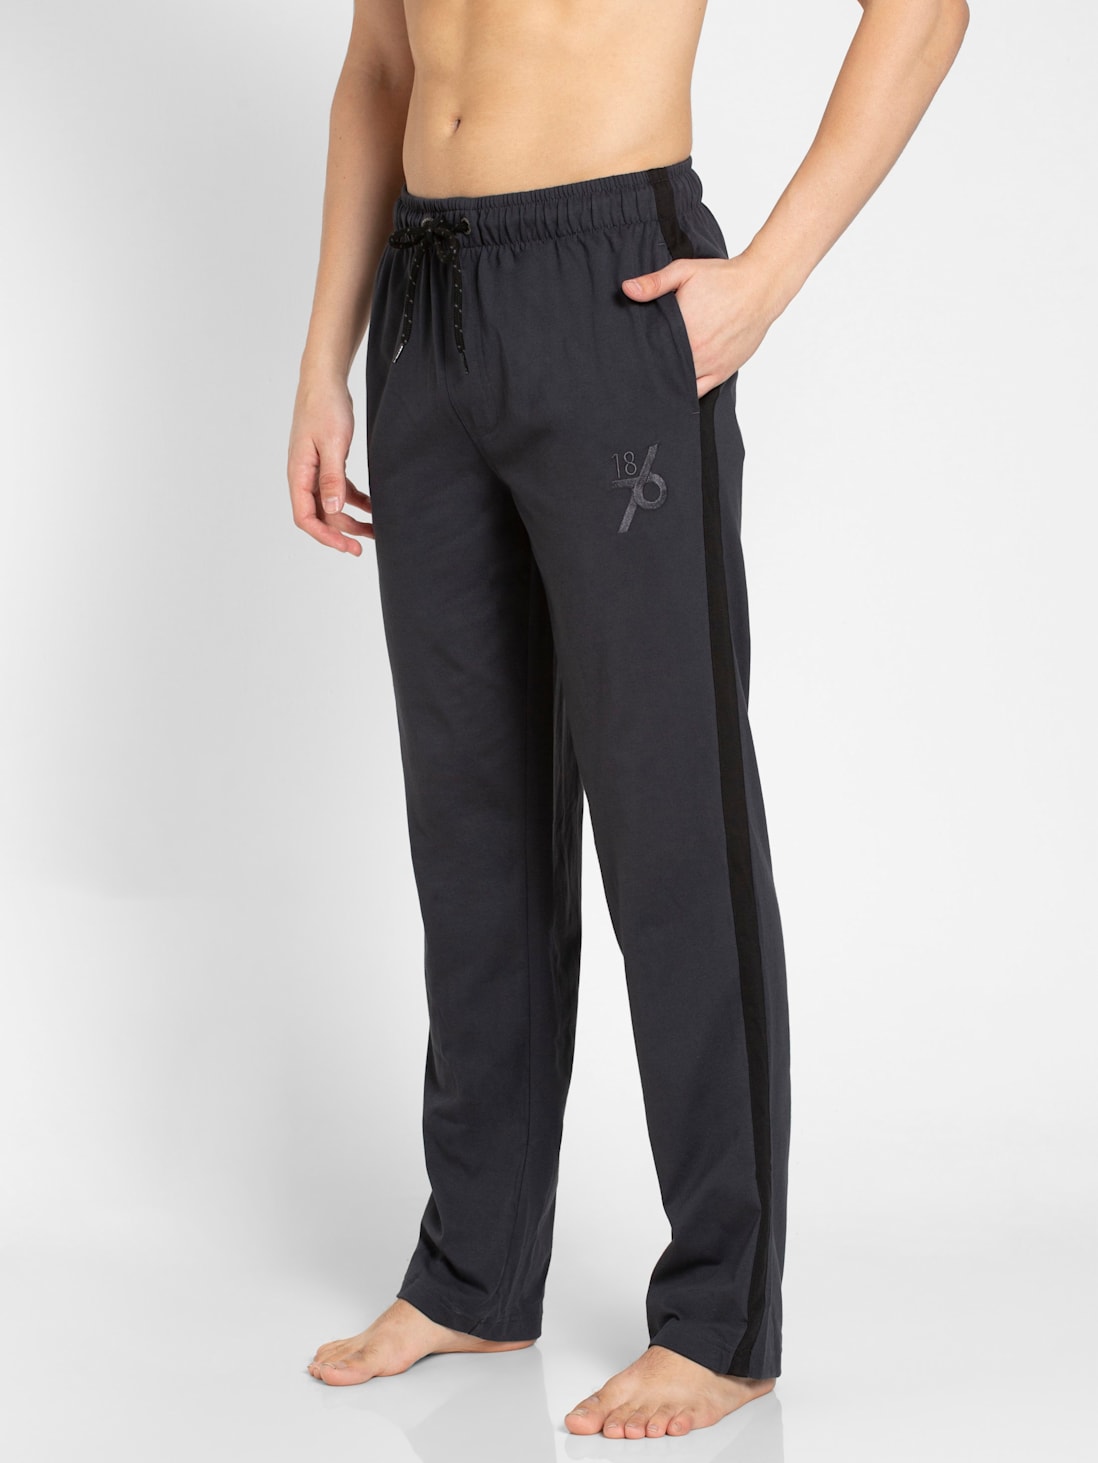 Buy jockey pants for womens cotton in India @ Limeroad